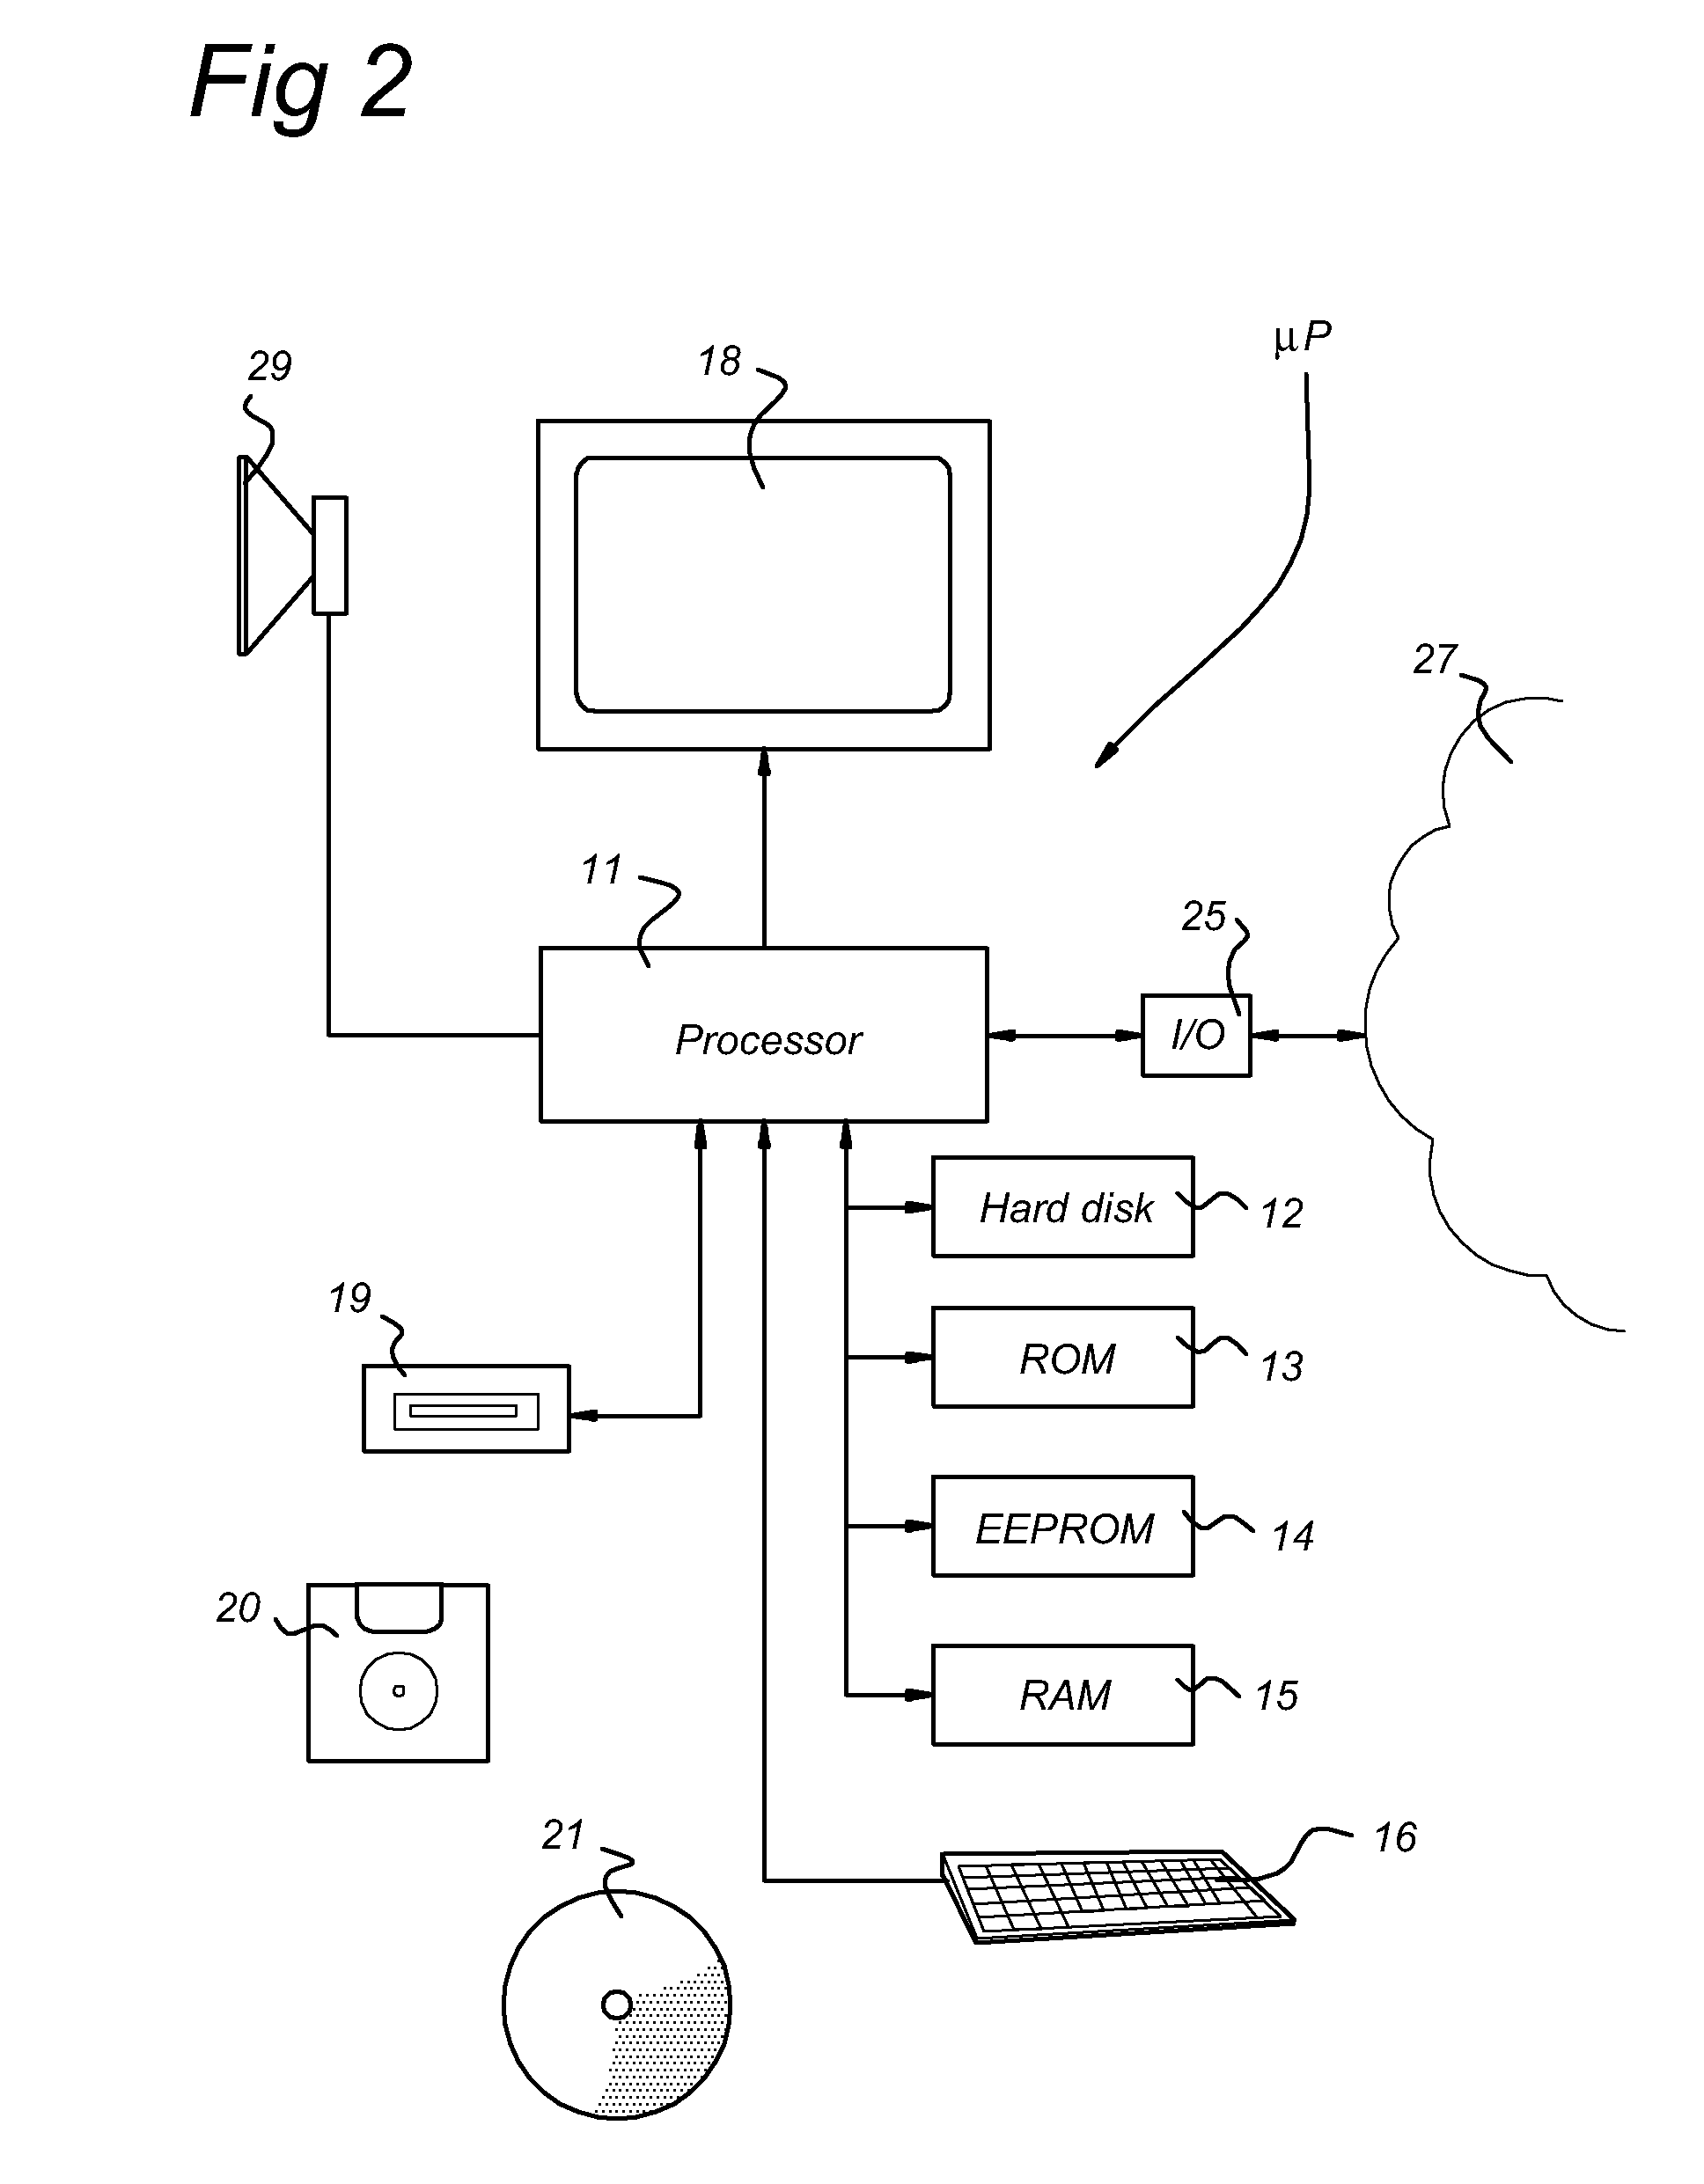 Apparatus for and method of junction view display